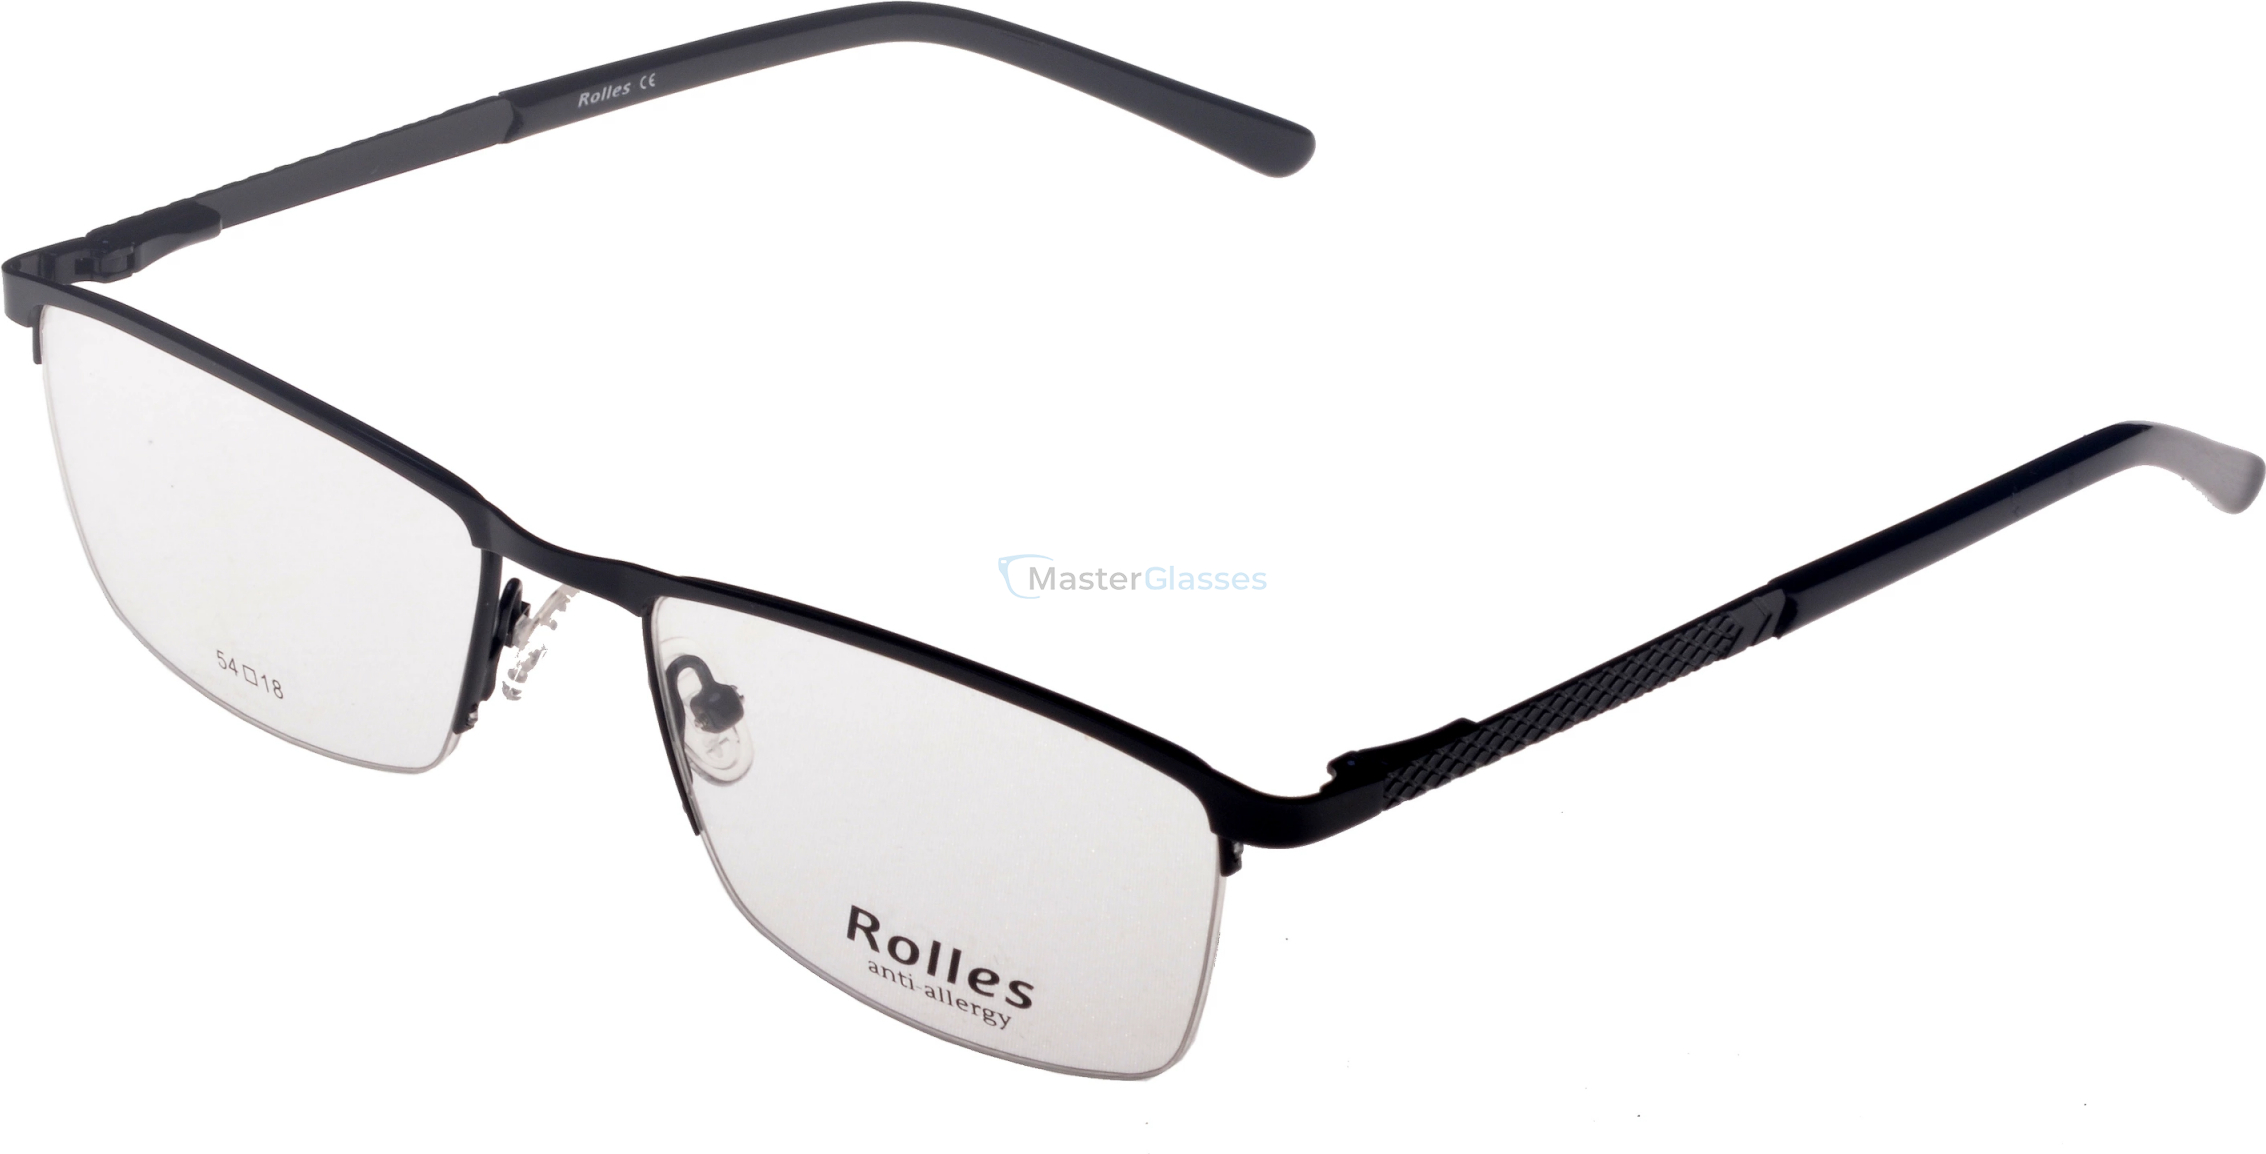  Rolles 630 01